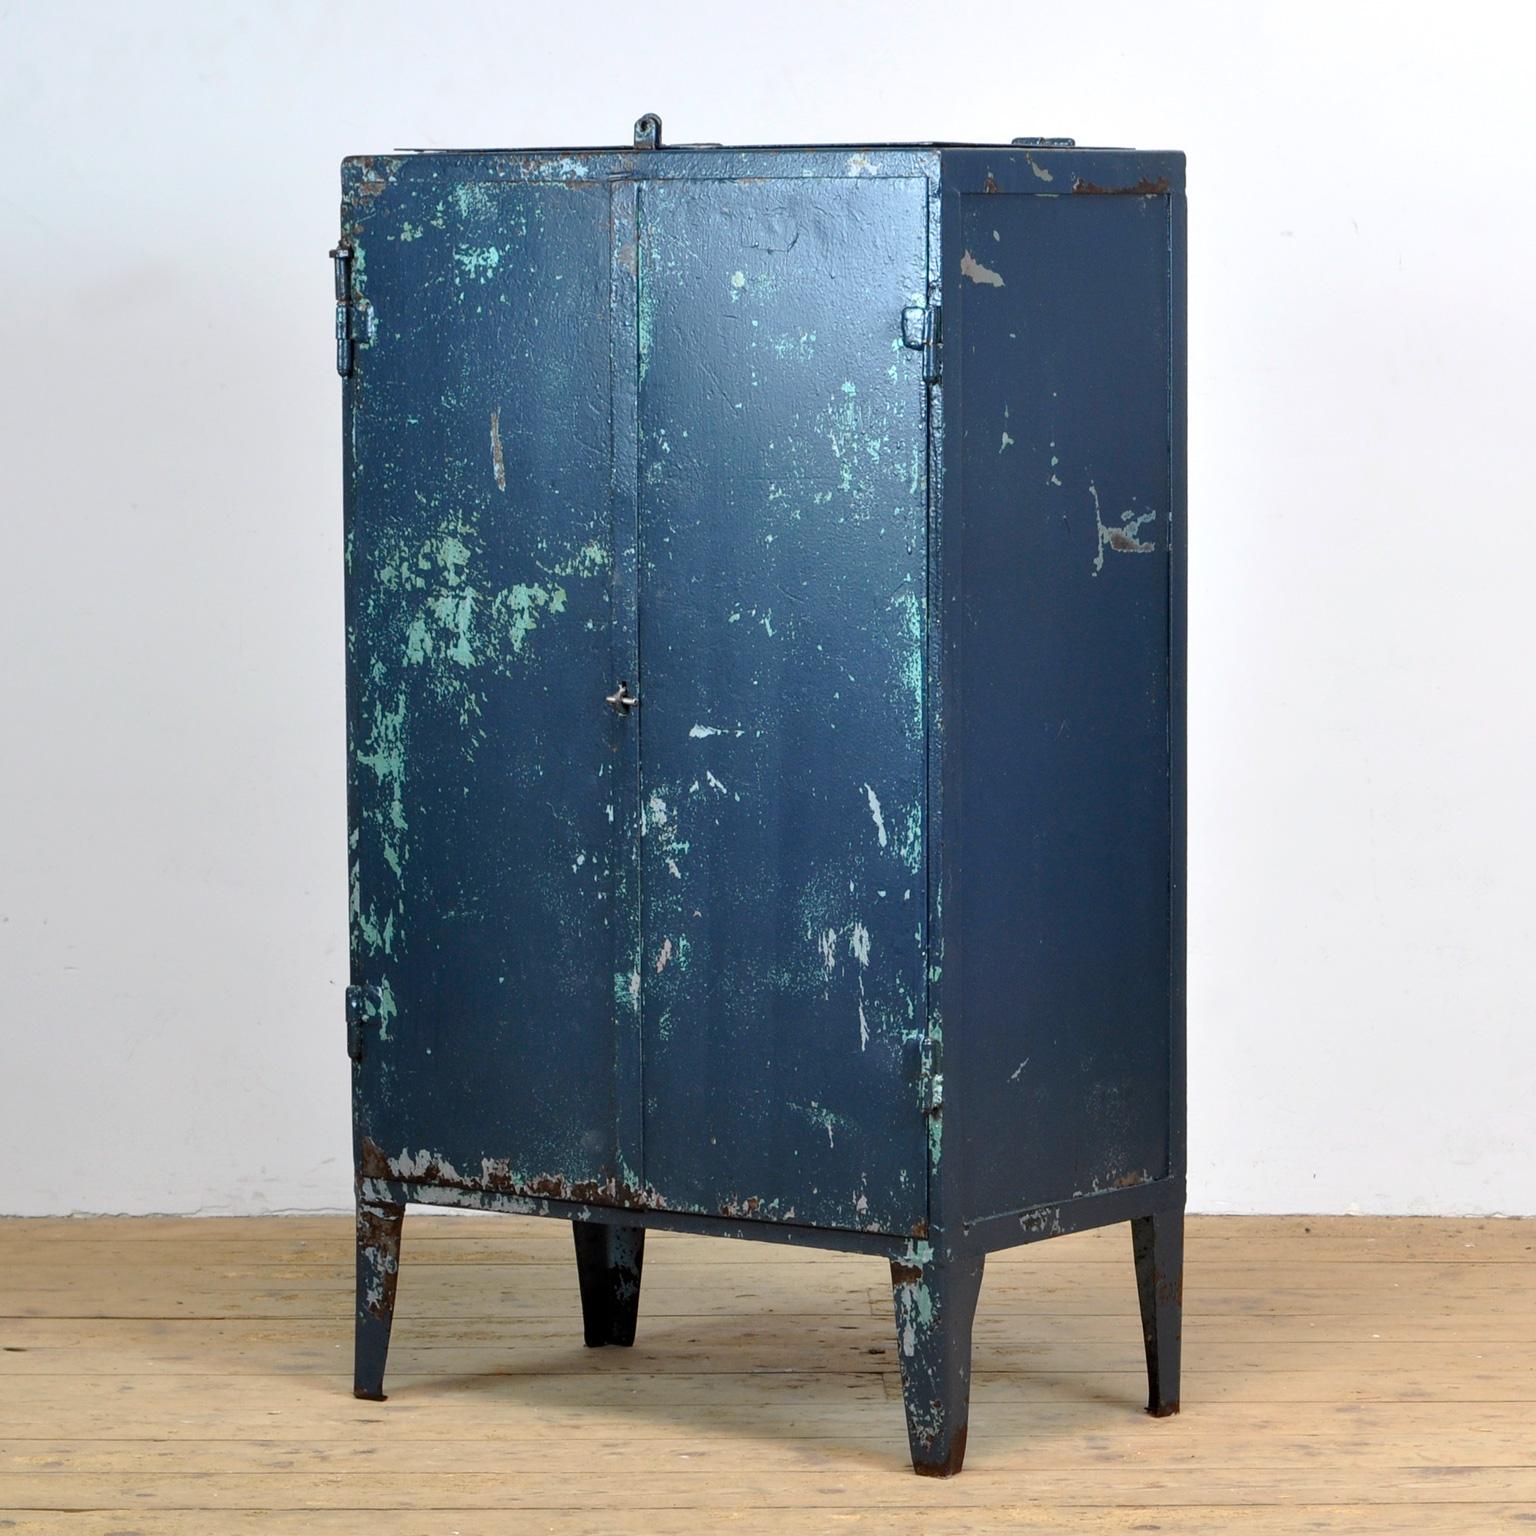 Industrial Iron Cabinet, 1960s In Good Condition For Sale In Amsterdam, Noord Holland